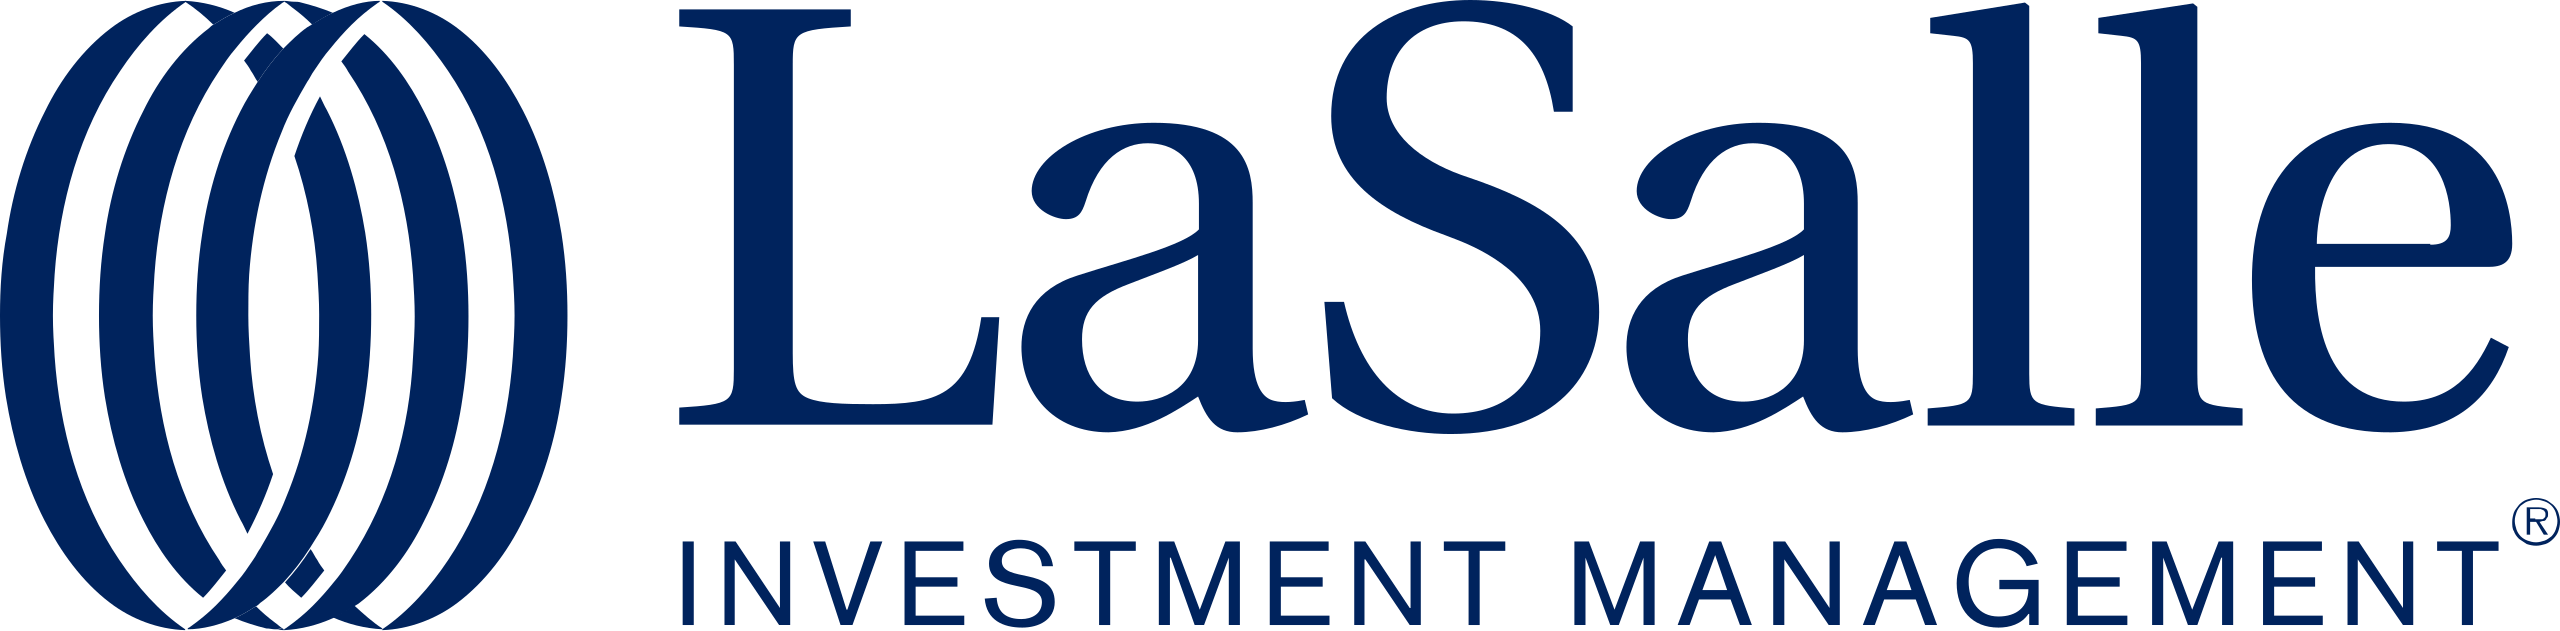 Lasalle Investment Management reviews